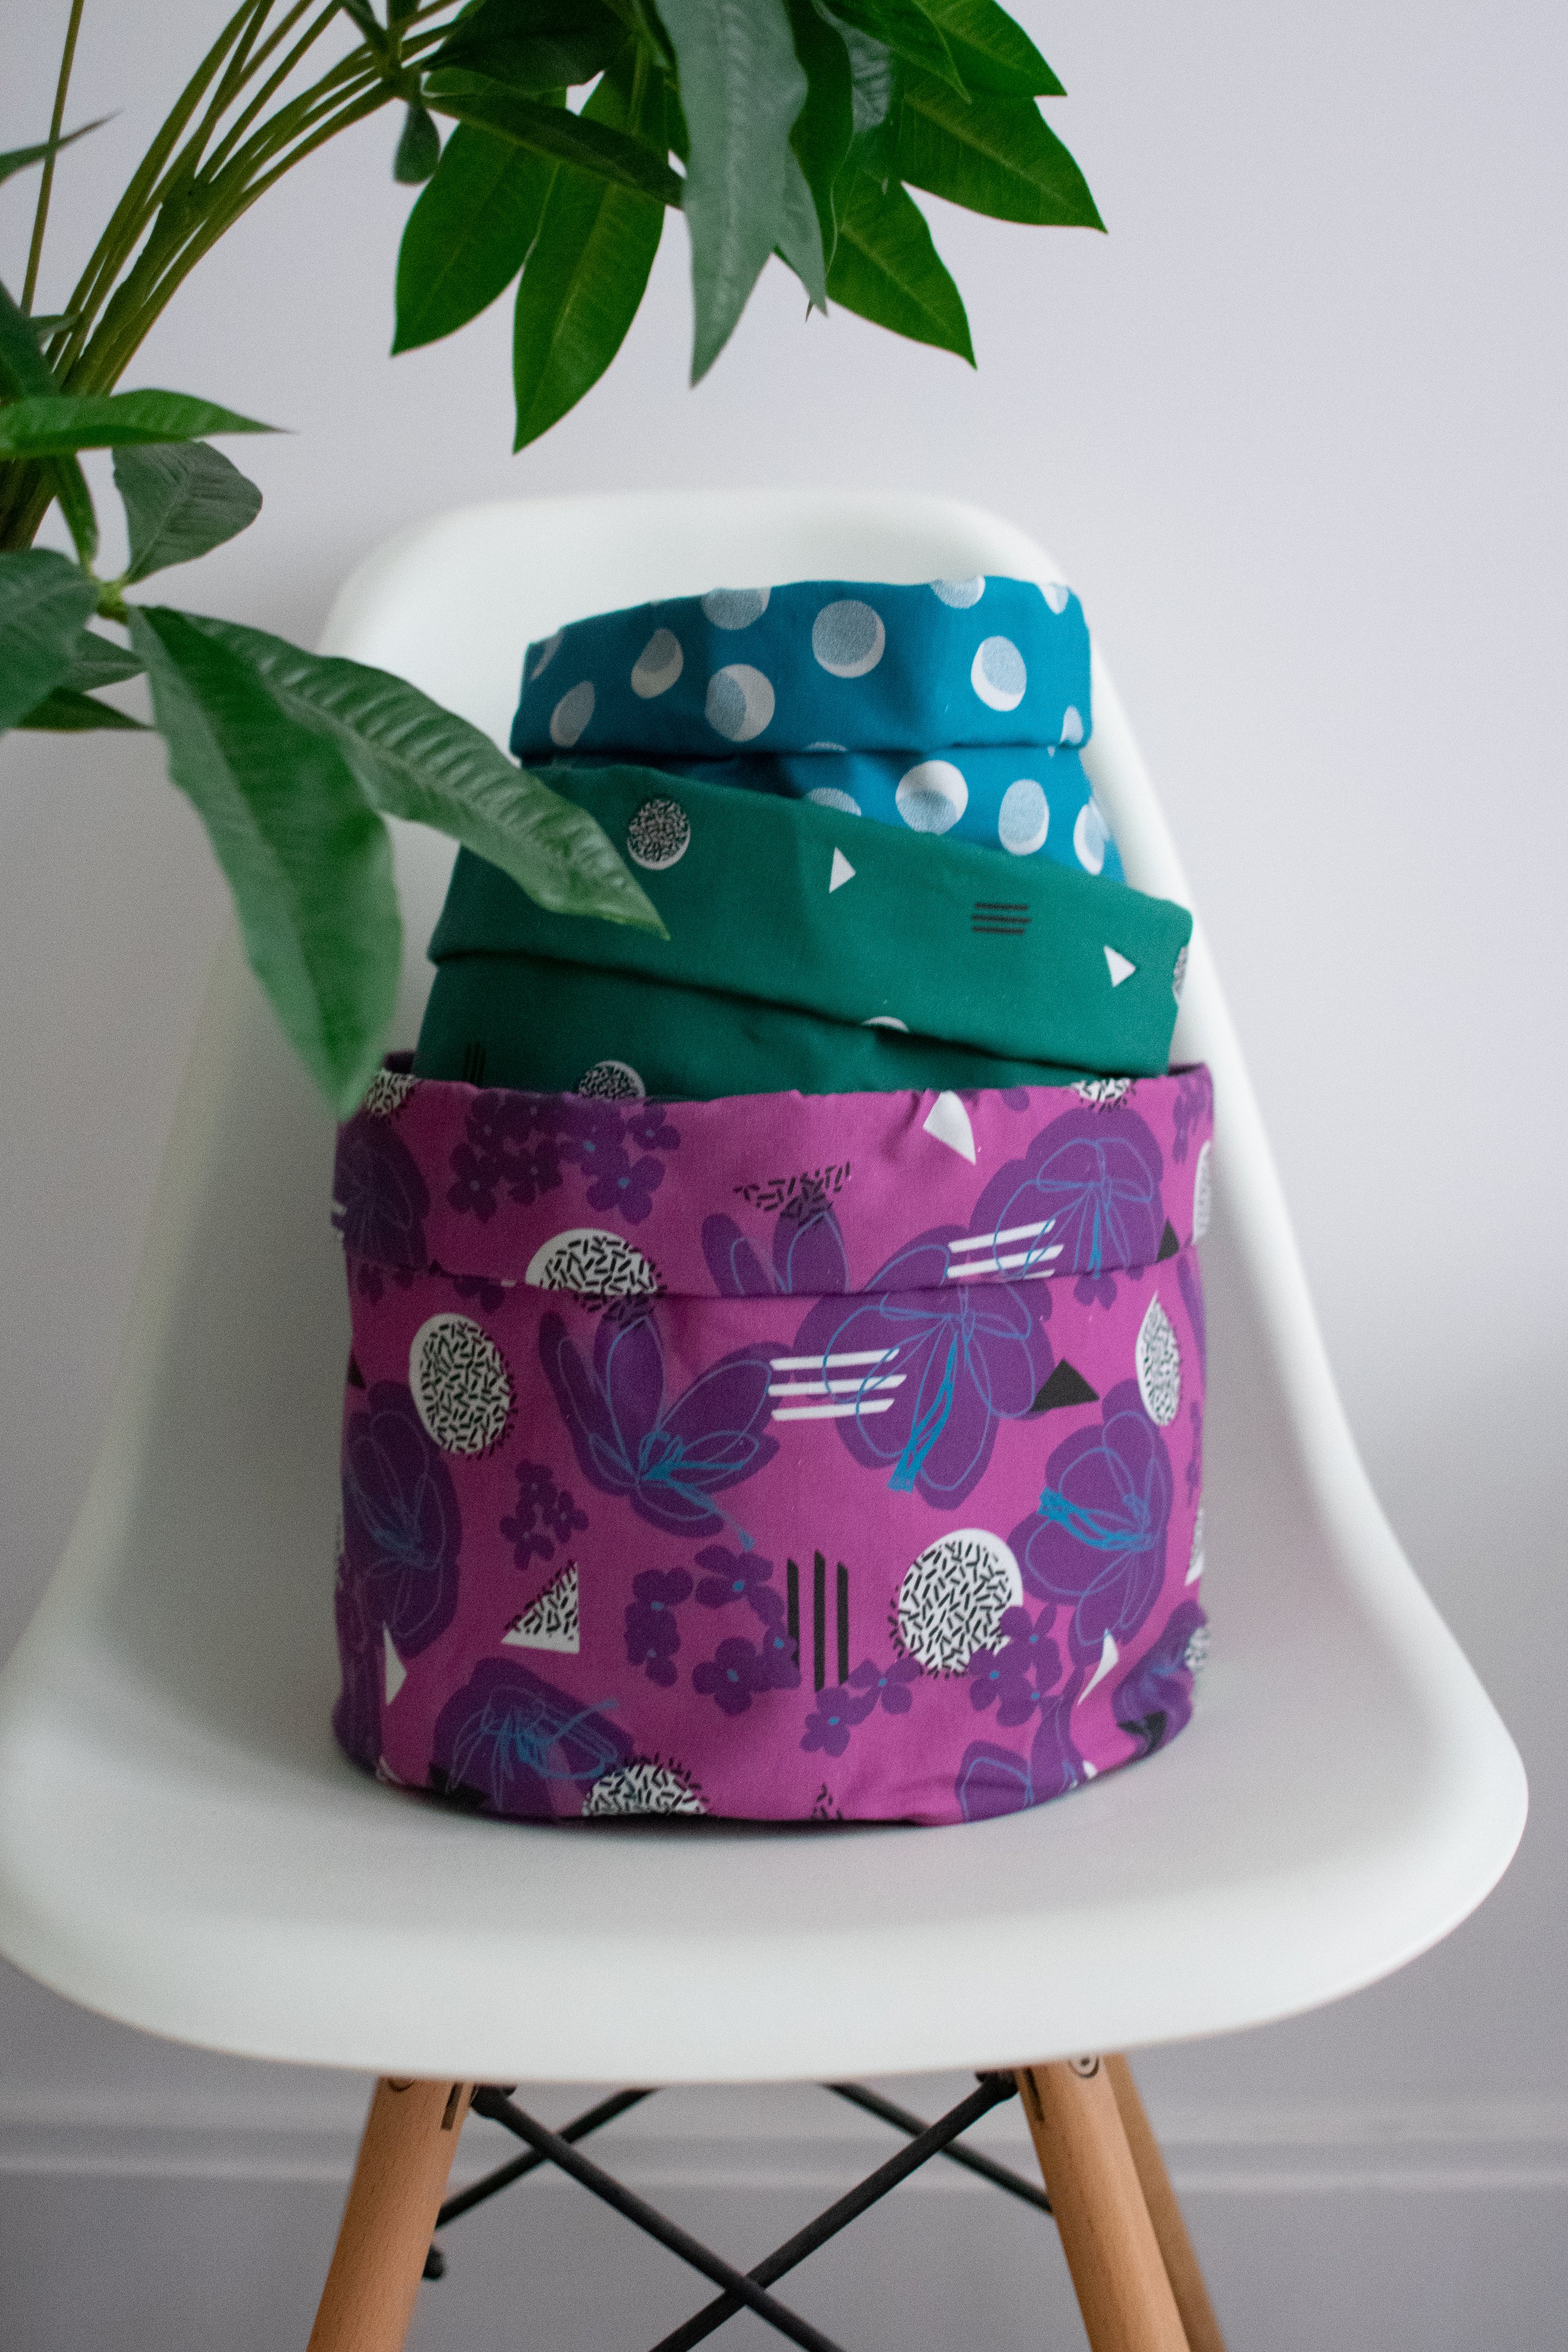  These handmade fabric bins are perfect for organizing and storing items around your home. They are made with the Dreaming fabric collection by Wax and Wane Studio from Hawthorne Supply Co. Each bin is made from high quality fabric that has a luxurio